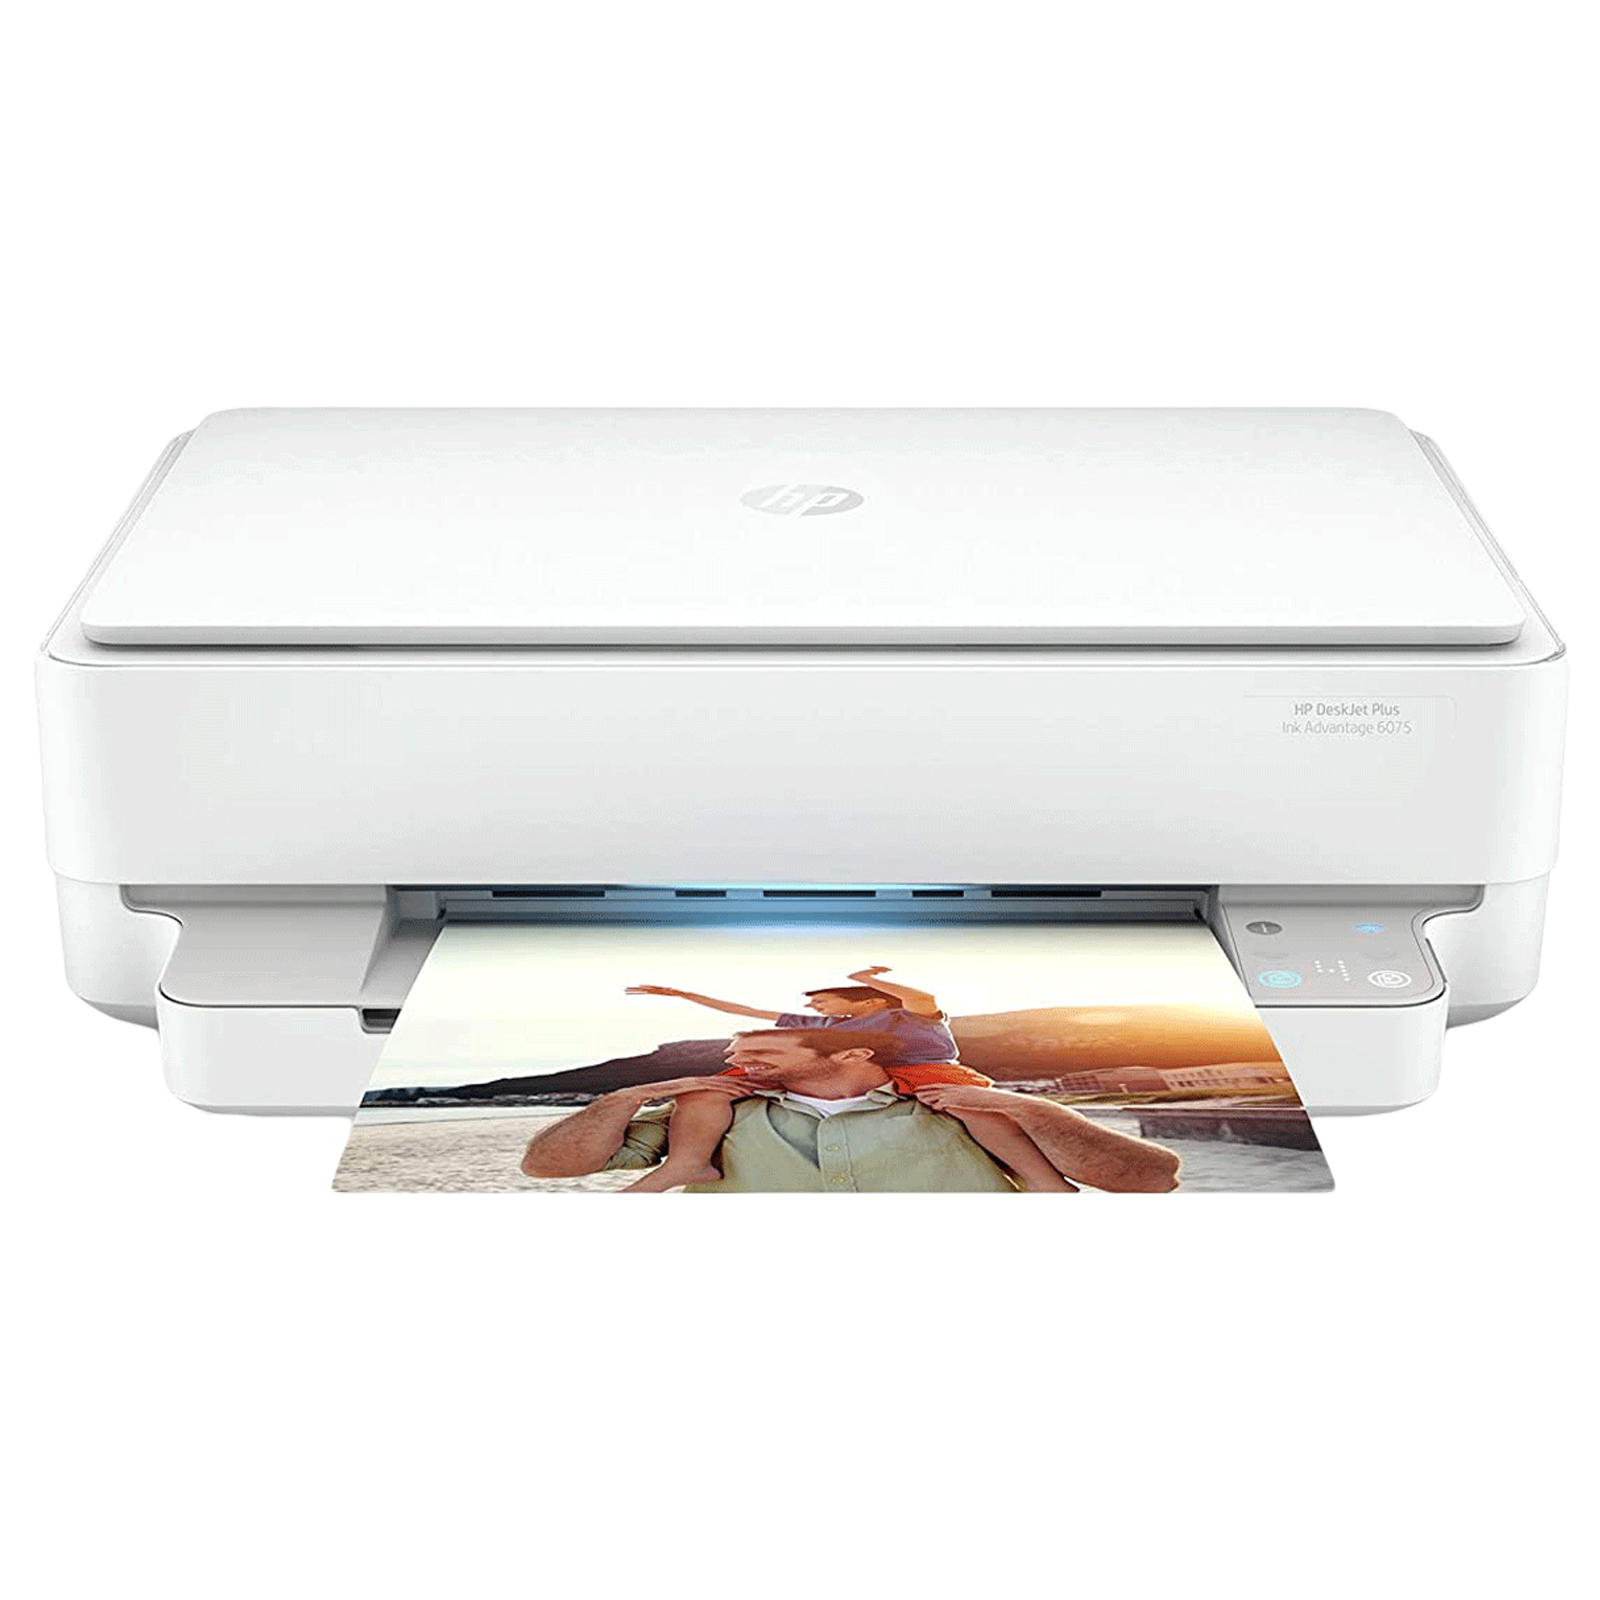 HP DeskJet Plus Ink Efficient 6075 Wireless Color All-in-One Inkjet Printer (Automatic Duplex Printing, 5SE26B, White)_1